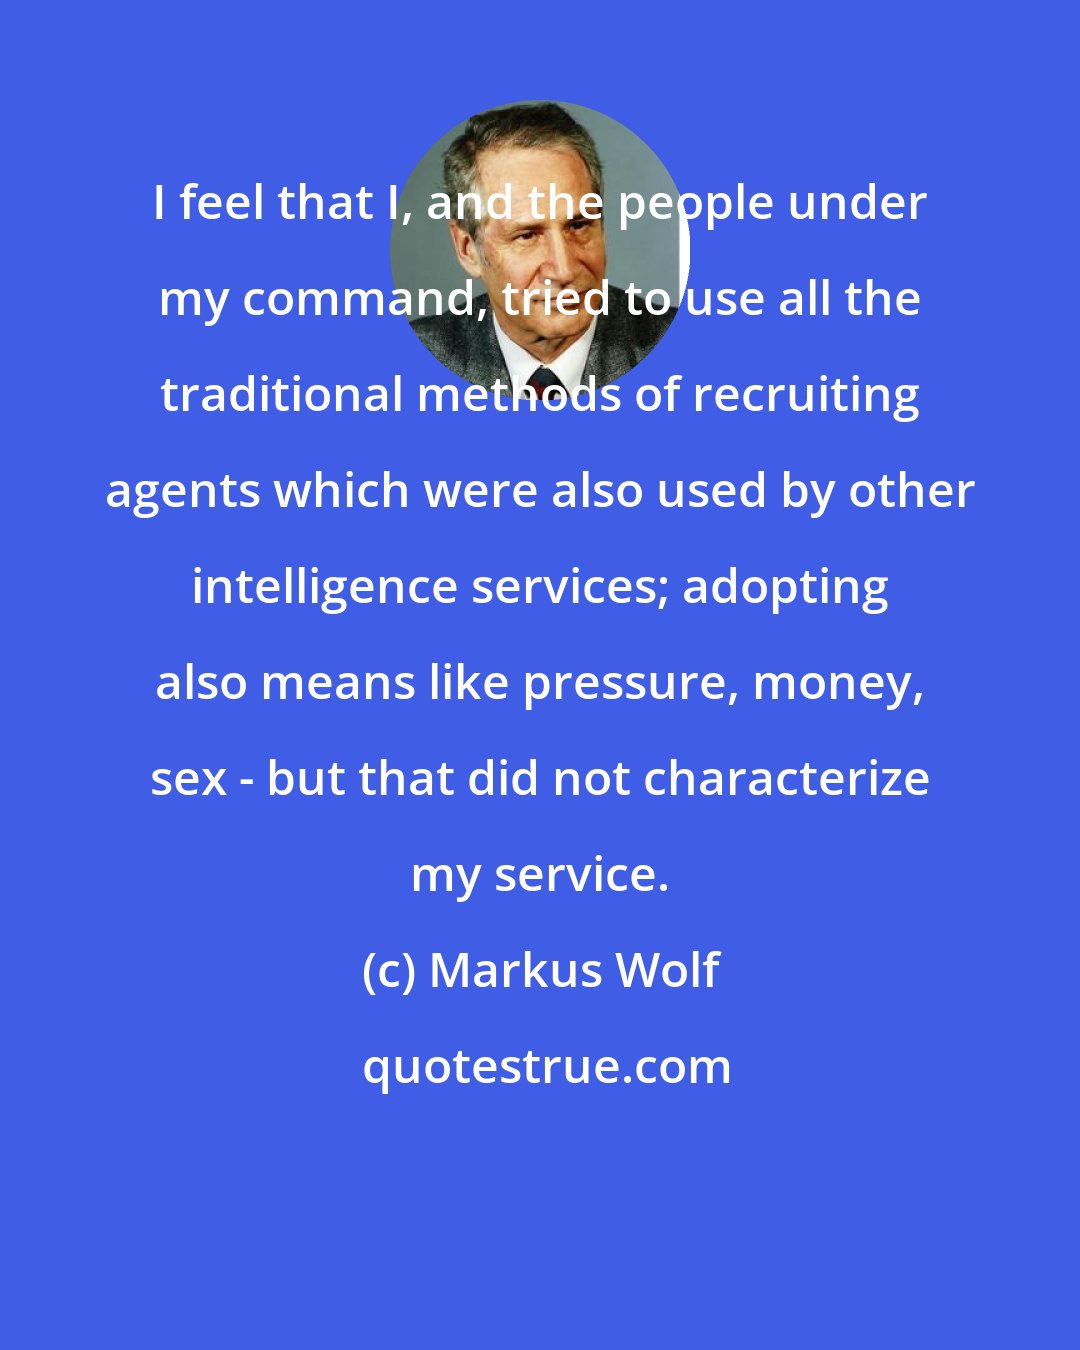 Markus Wolf: I feel that I, and the people under my command, tried to use all the traditional methods of recruiting agents which were also used by other intelligence services; adopting also means like pressure, money, sex - but that did not characterize my service.